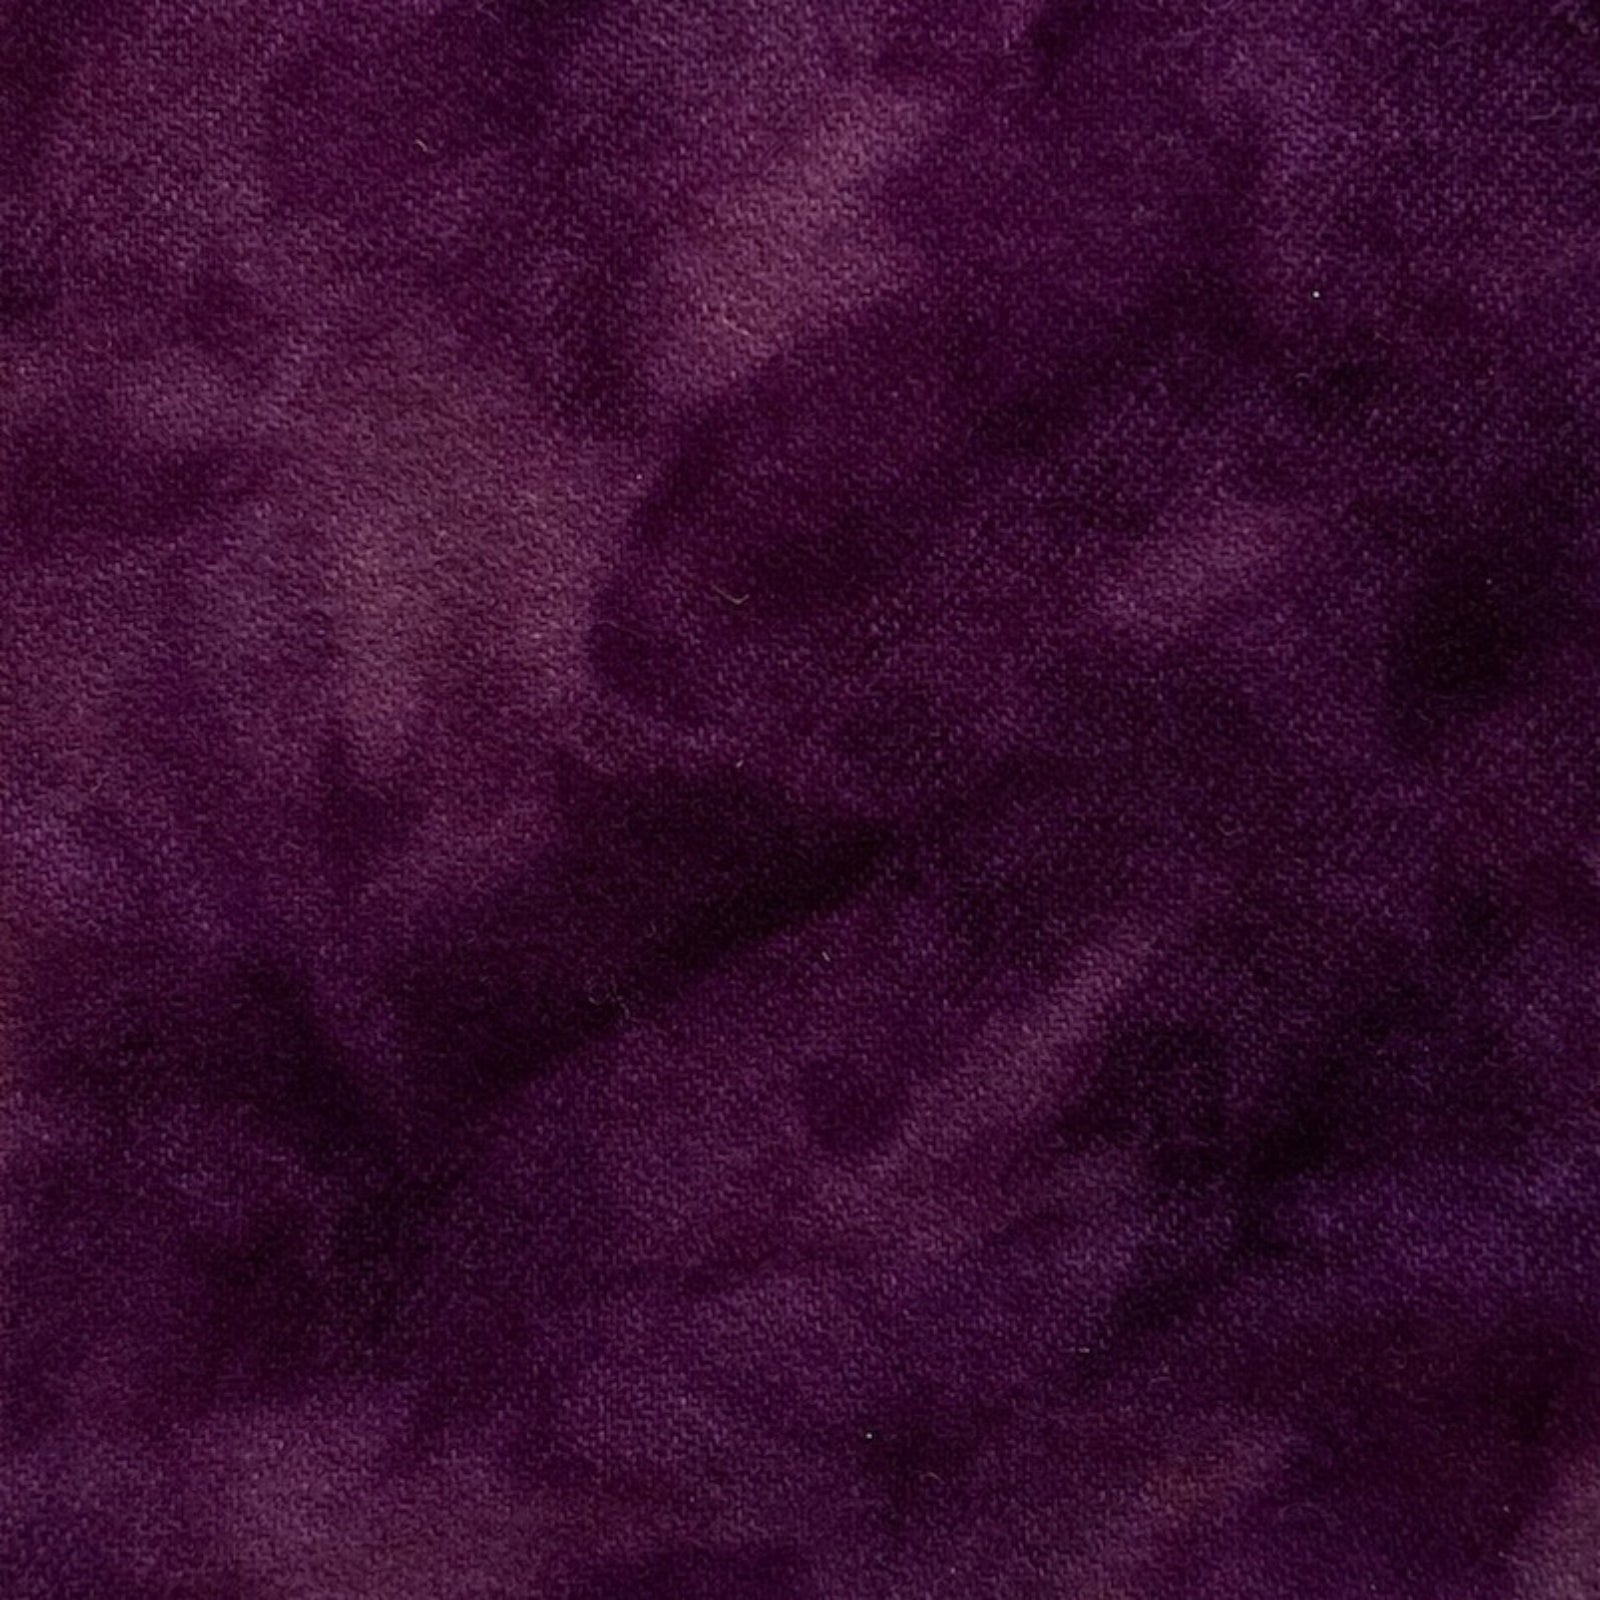 Orchid Pink - Colorama Hand Dyed Wool - Offered by HoneyBee Hive Rug Hooking